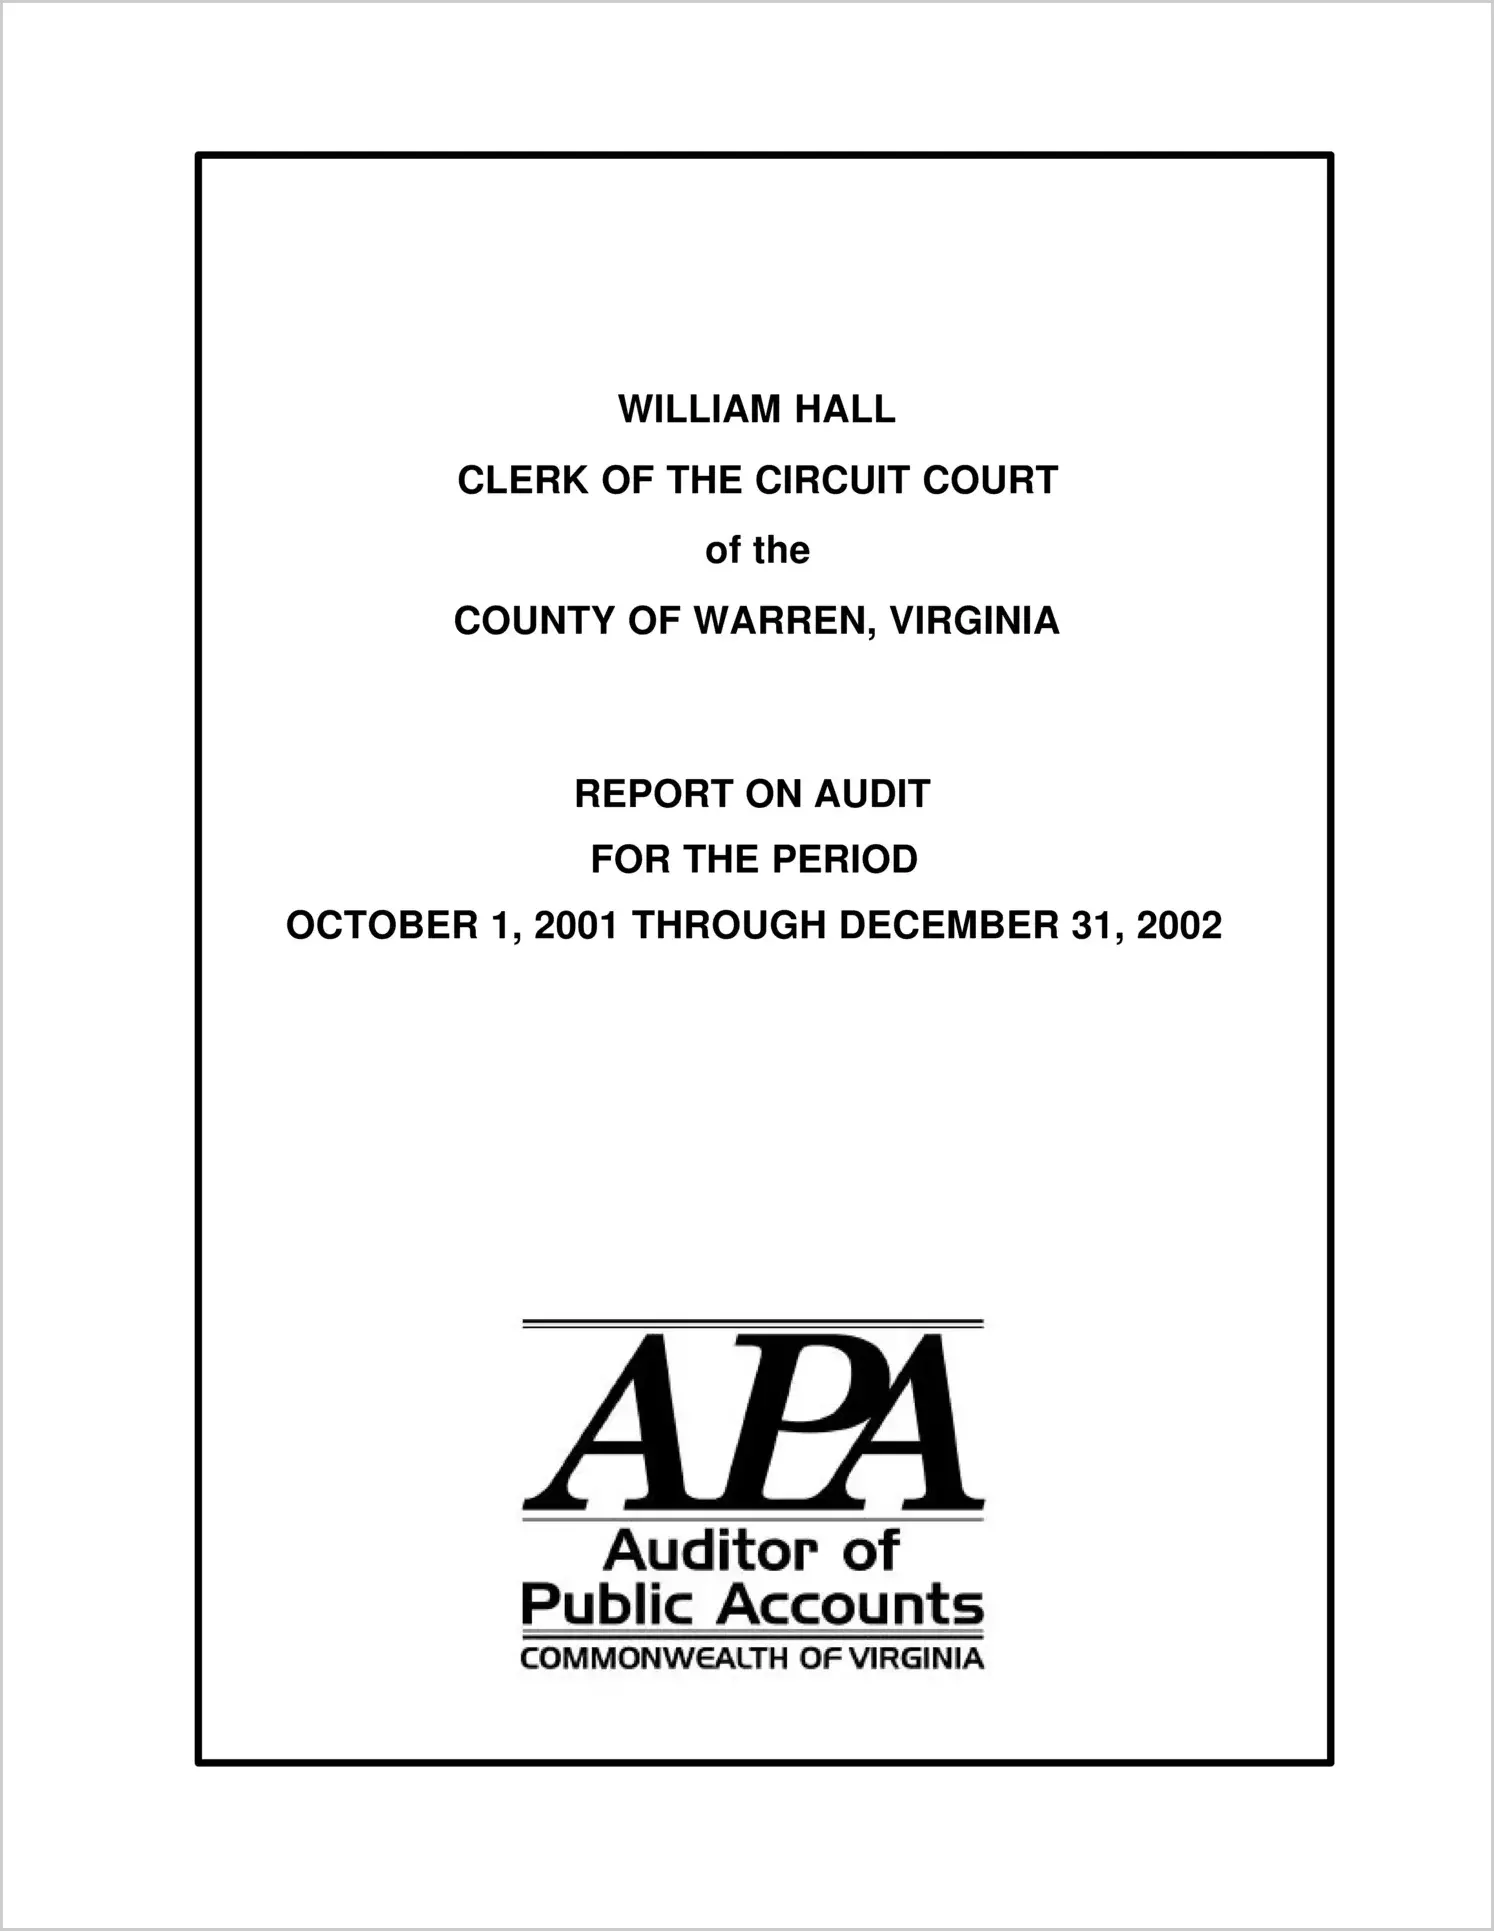 Clerk of the Circuit Court for the County of Warren for the period October 1, 2001 through December, 2002